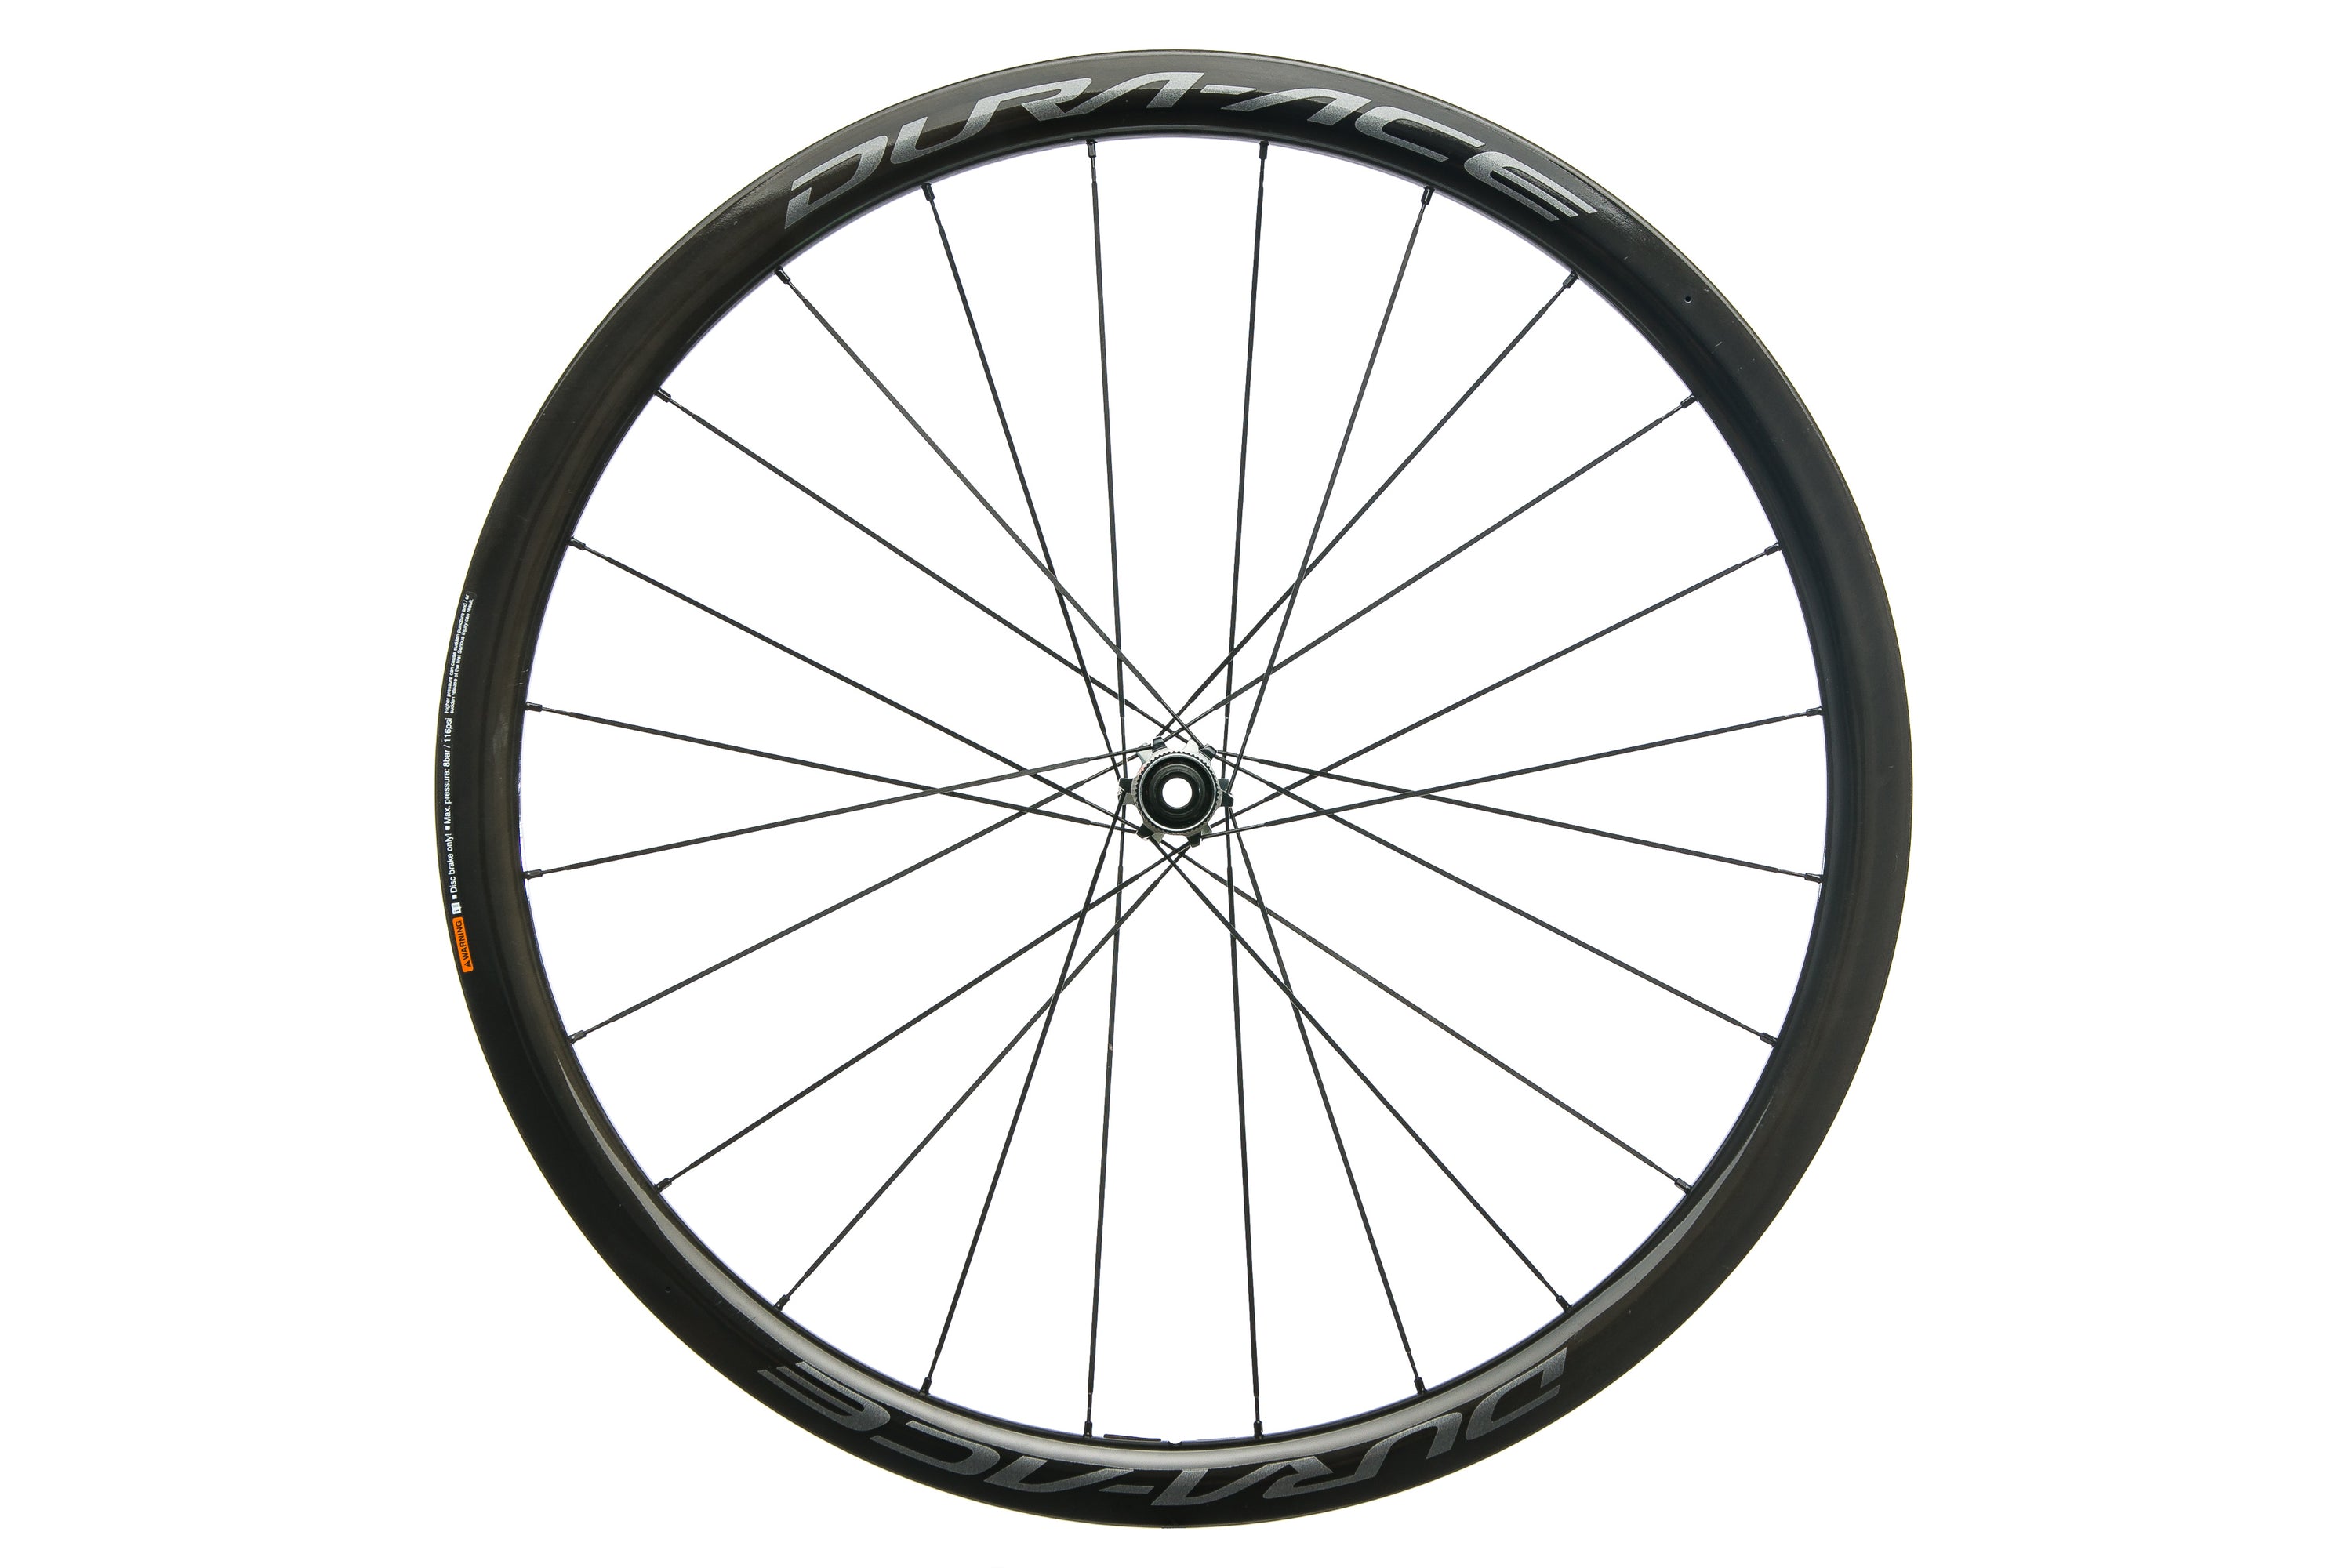 Shimano Dura-Ace WH-R9170-C40-TL-F12 Carbon Tubeless Front Wheel drive side